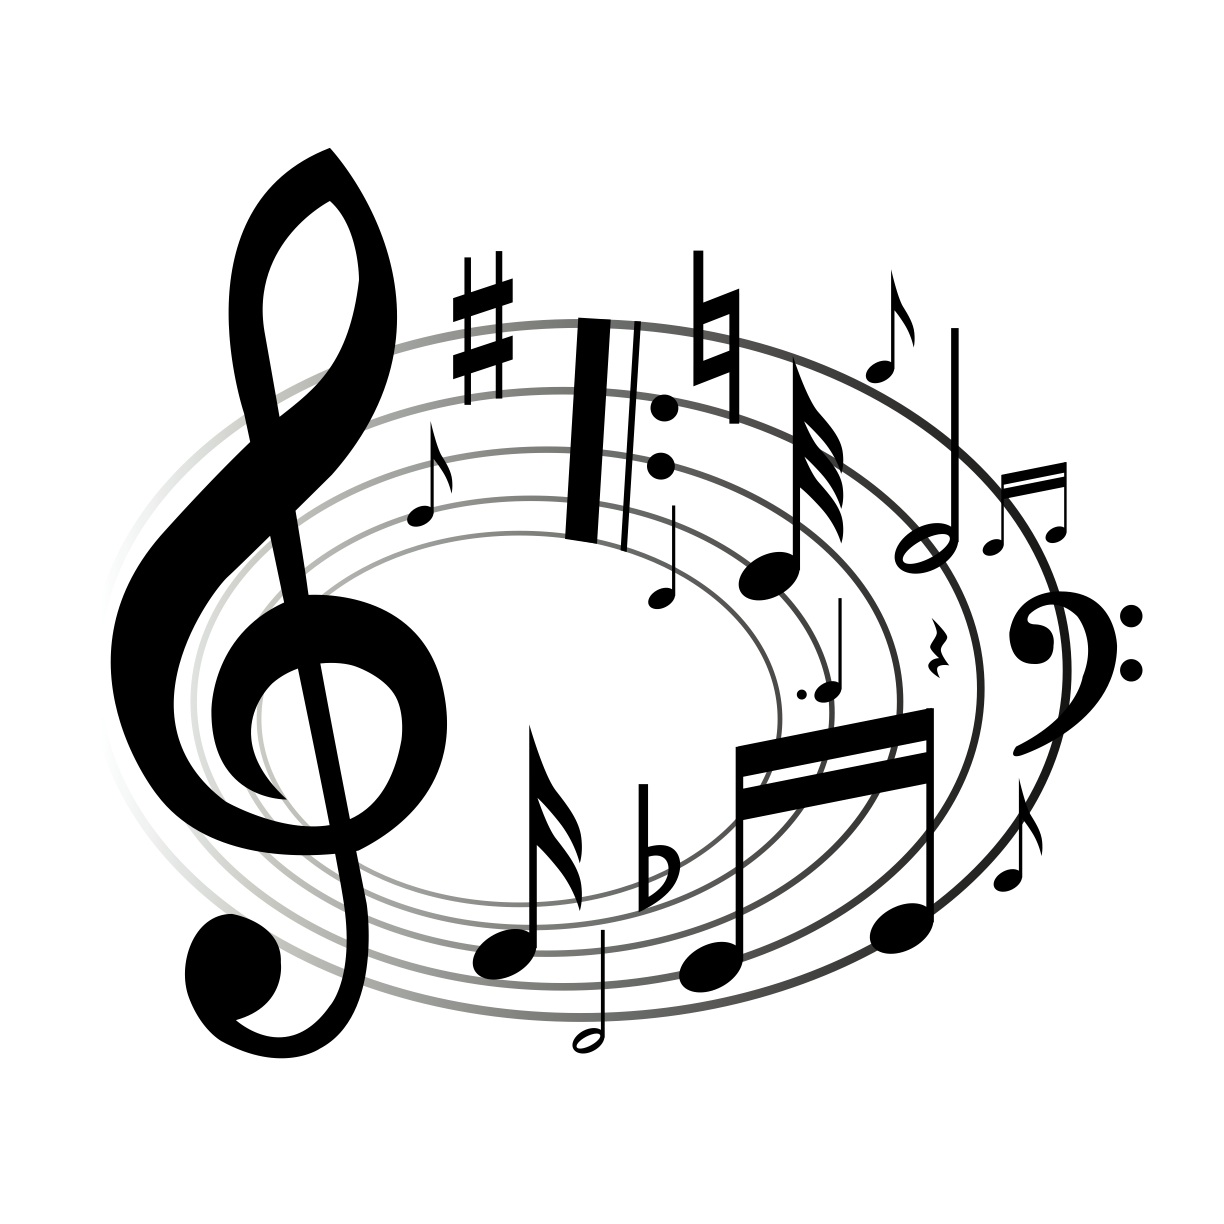 music-notes-clipart-black-and-white-music-notes-clip-art.jpg